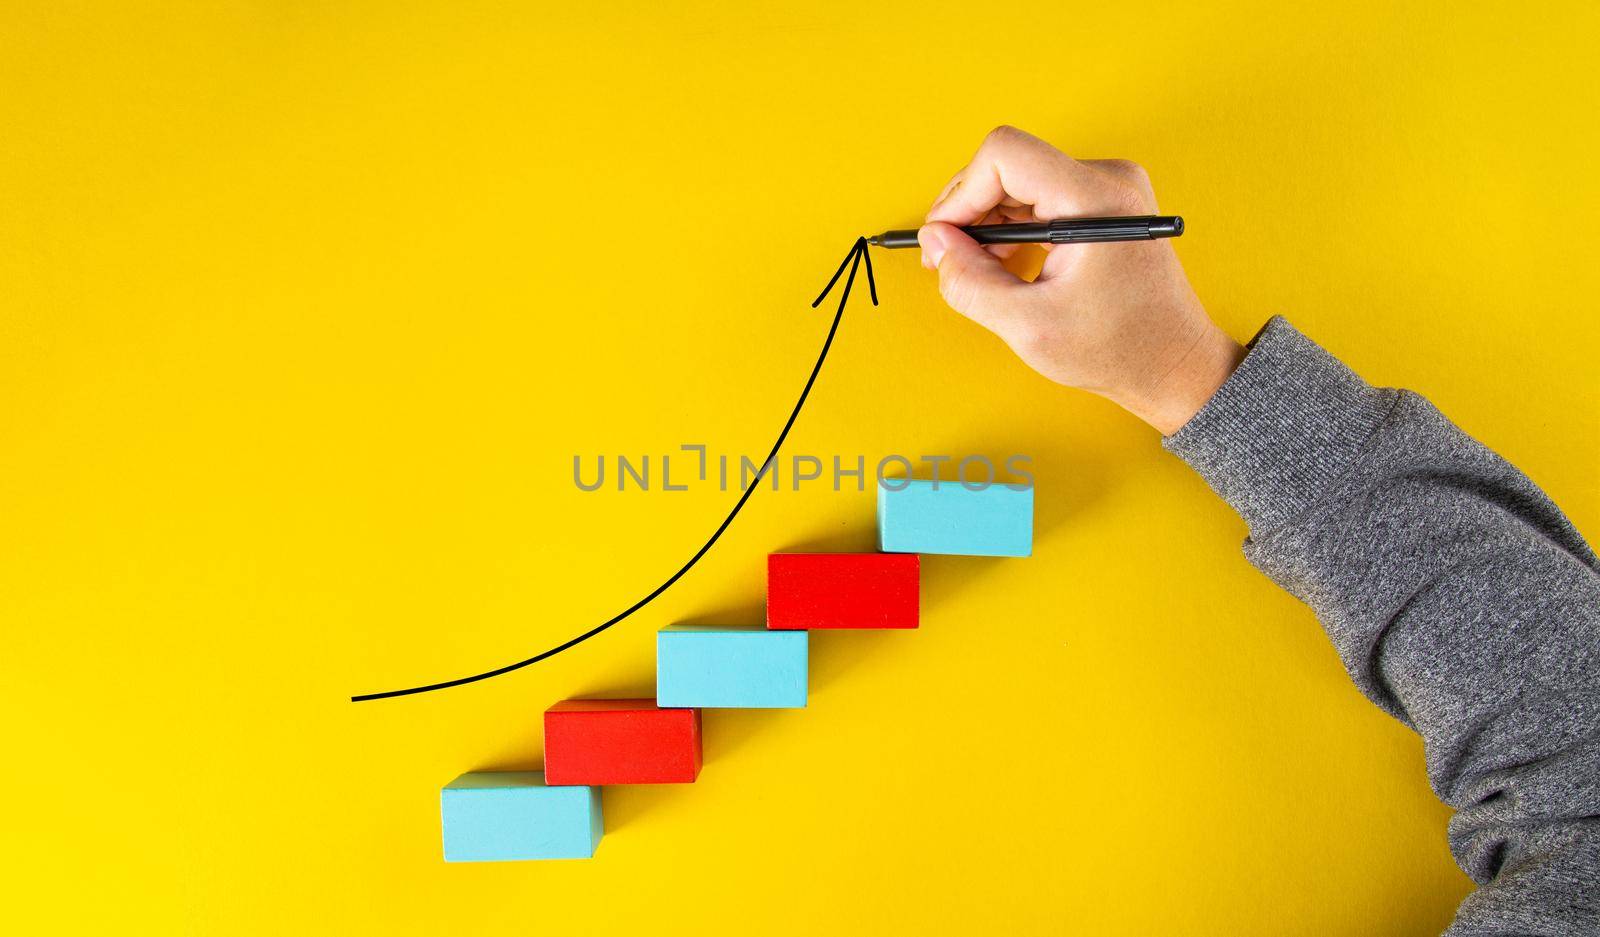 Male hand drawing an upward pointing arrow on top of growing graph made of wooden blocks over yellow background